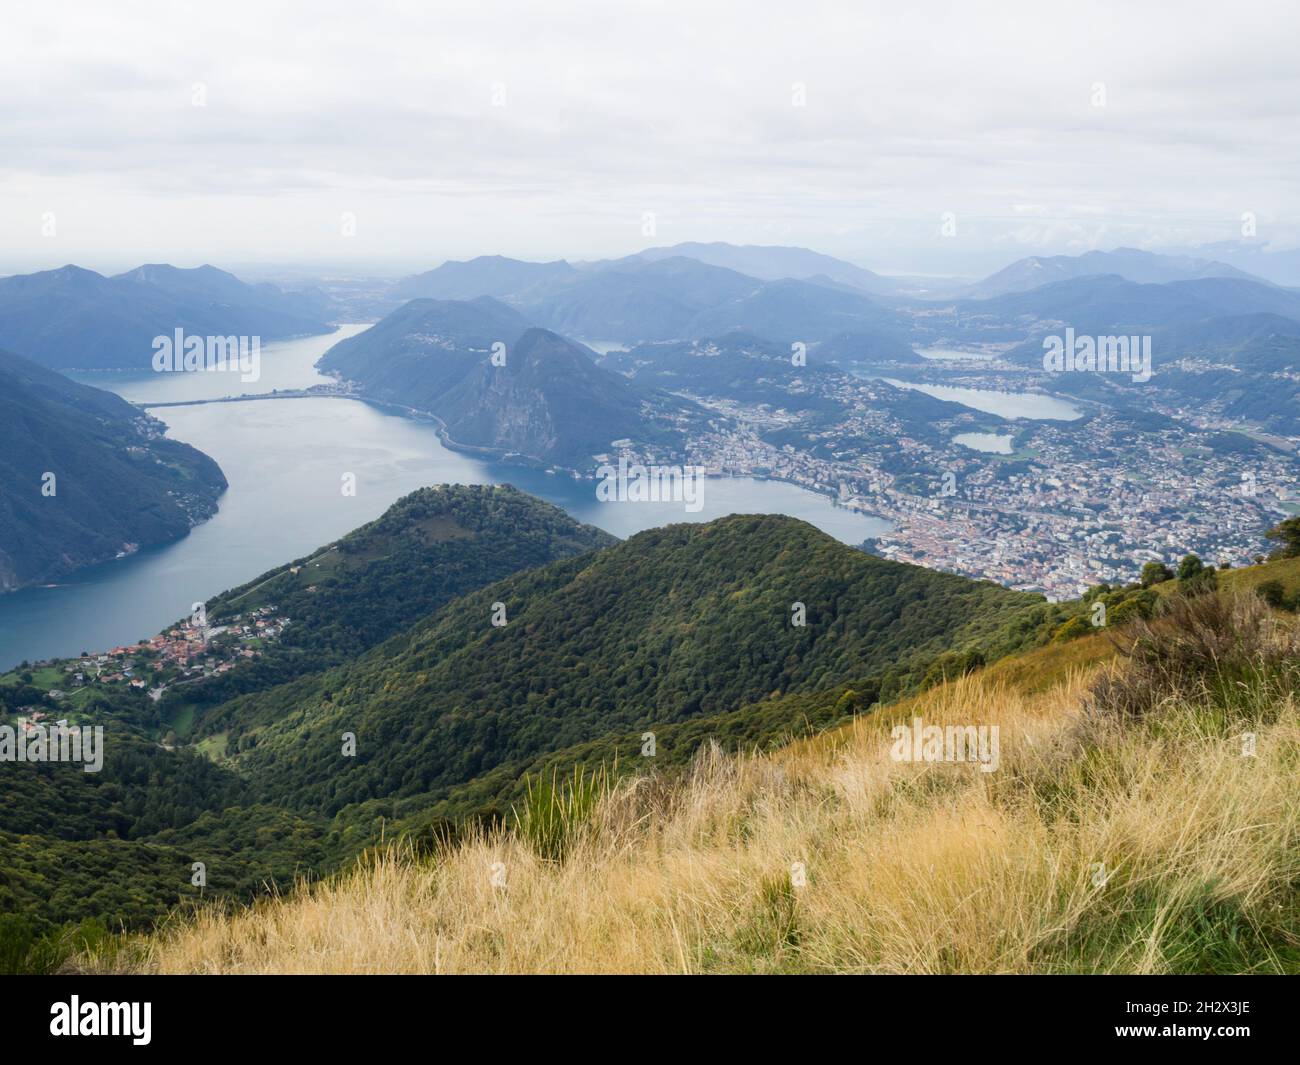 Overlooking the city of Lugano, Lake Lugano, mount San Salvatore and the viaduct of Melide. Stock Photo